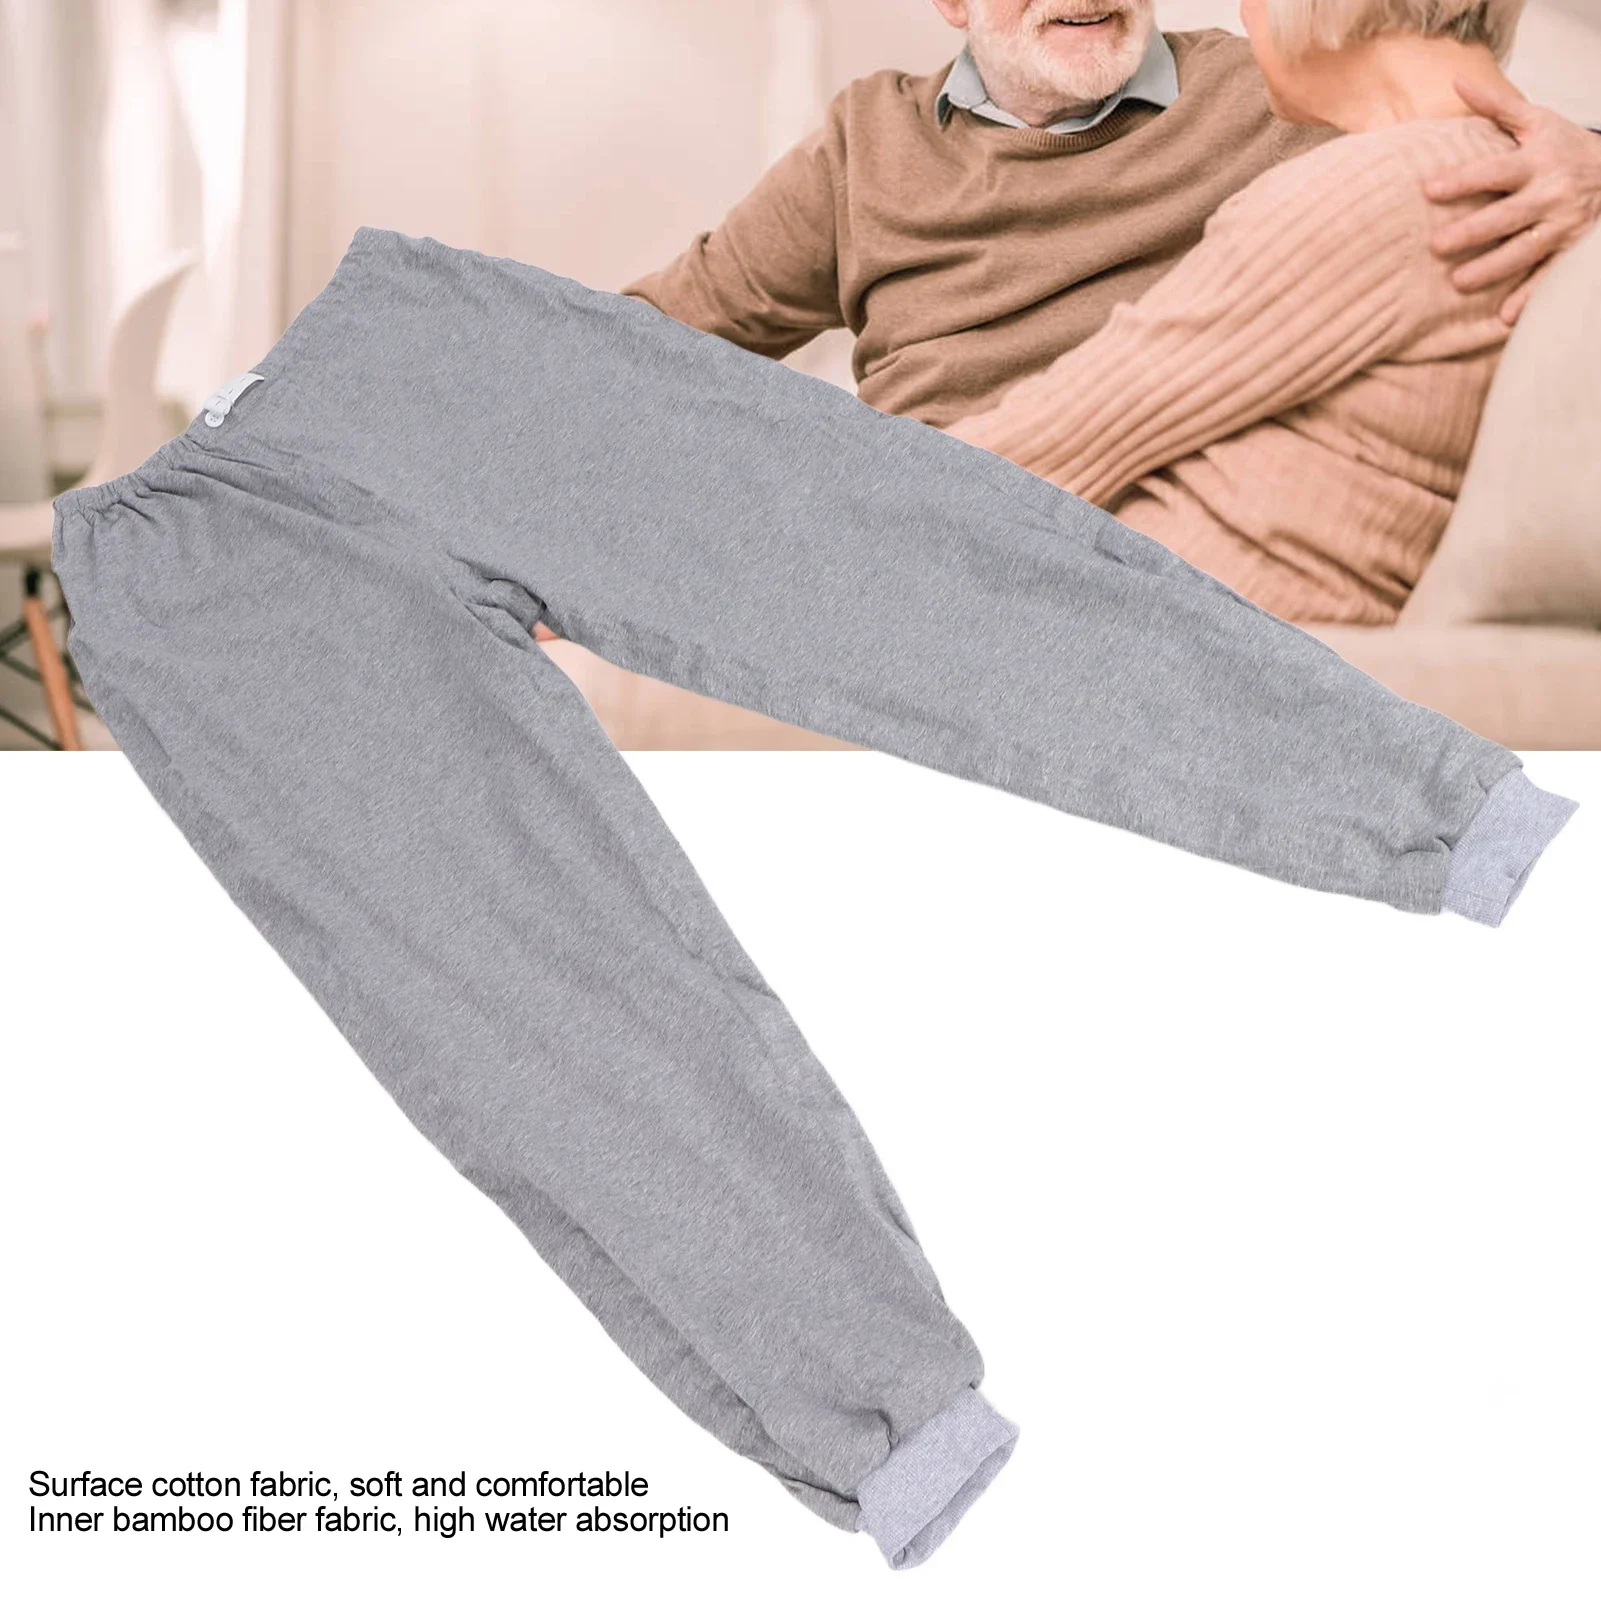 Plastic Pants for Adults with Incontinence，Adult Incontinence Pants，Plastic  Diapers, Waterproof and Reusable Elderly Diapers, Soft Surface, Suitable